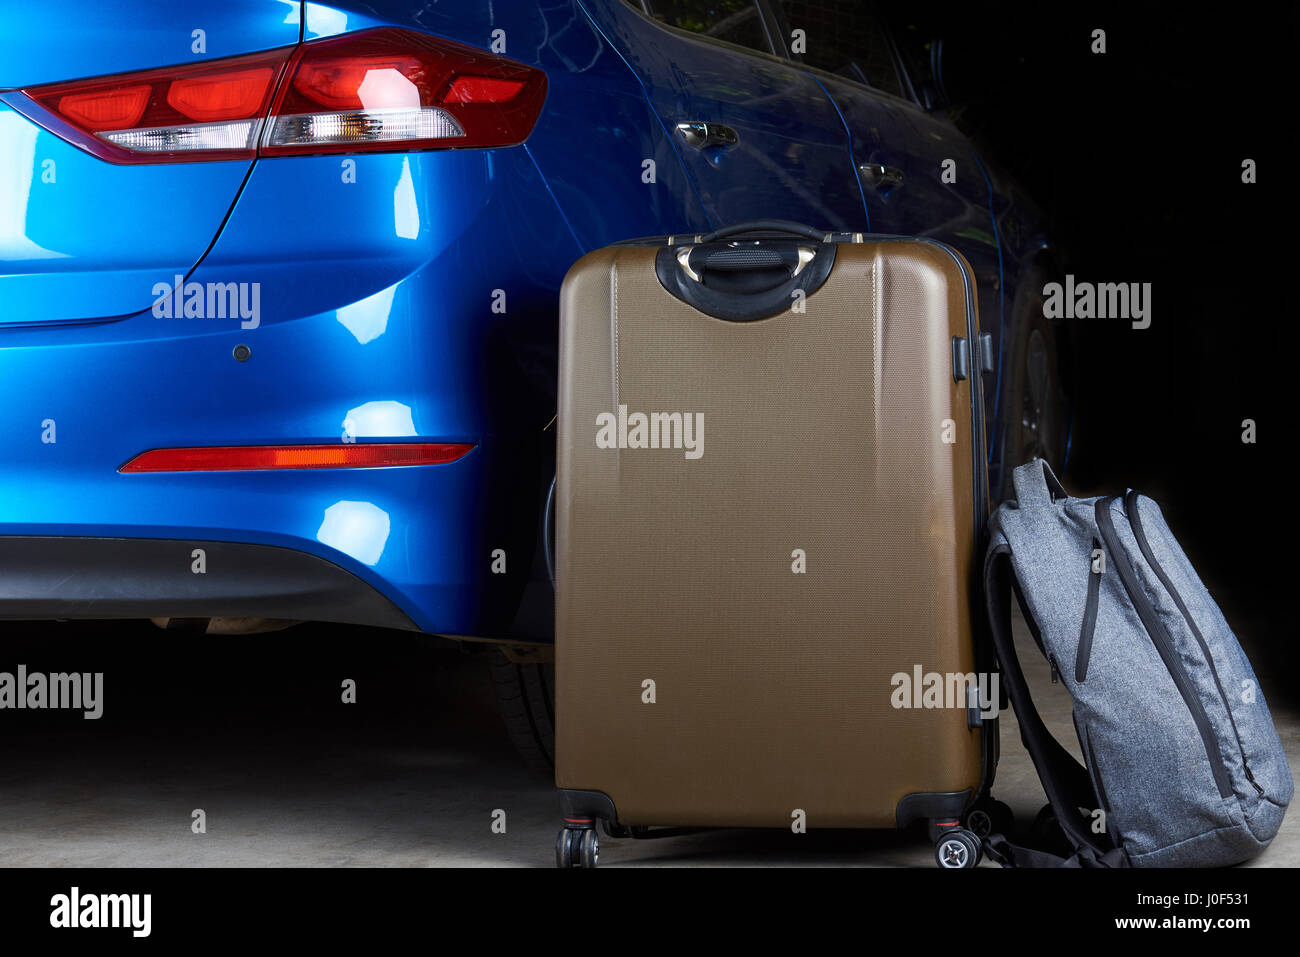 Road auto trip on blue modern car. Luggage bags stand next to modern car Stock Photo